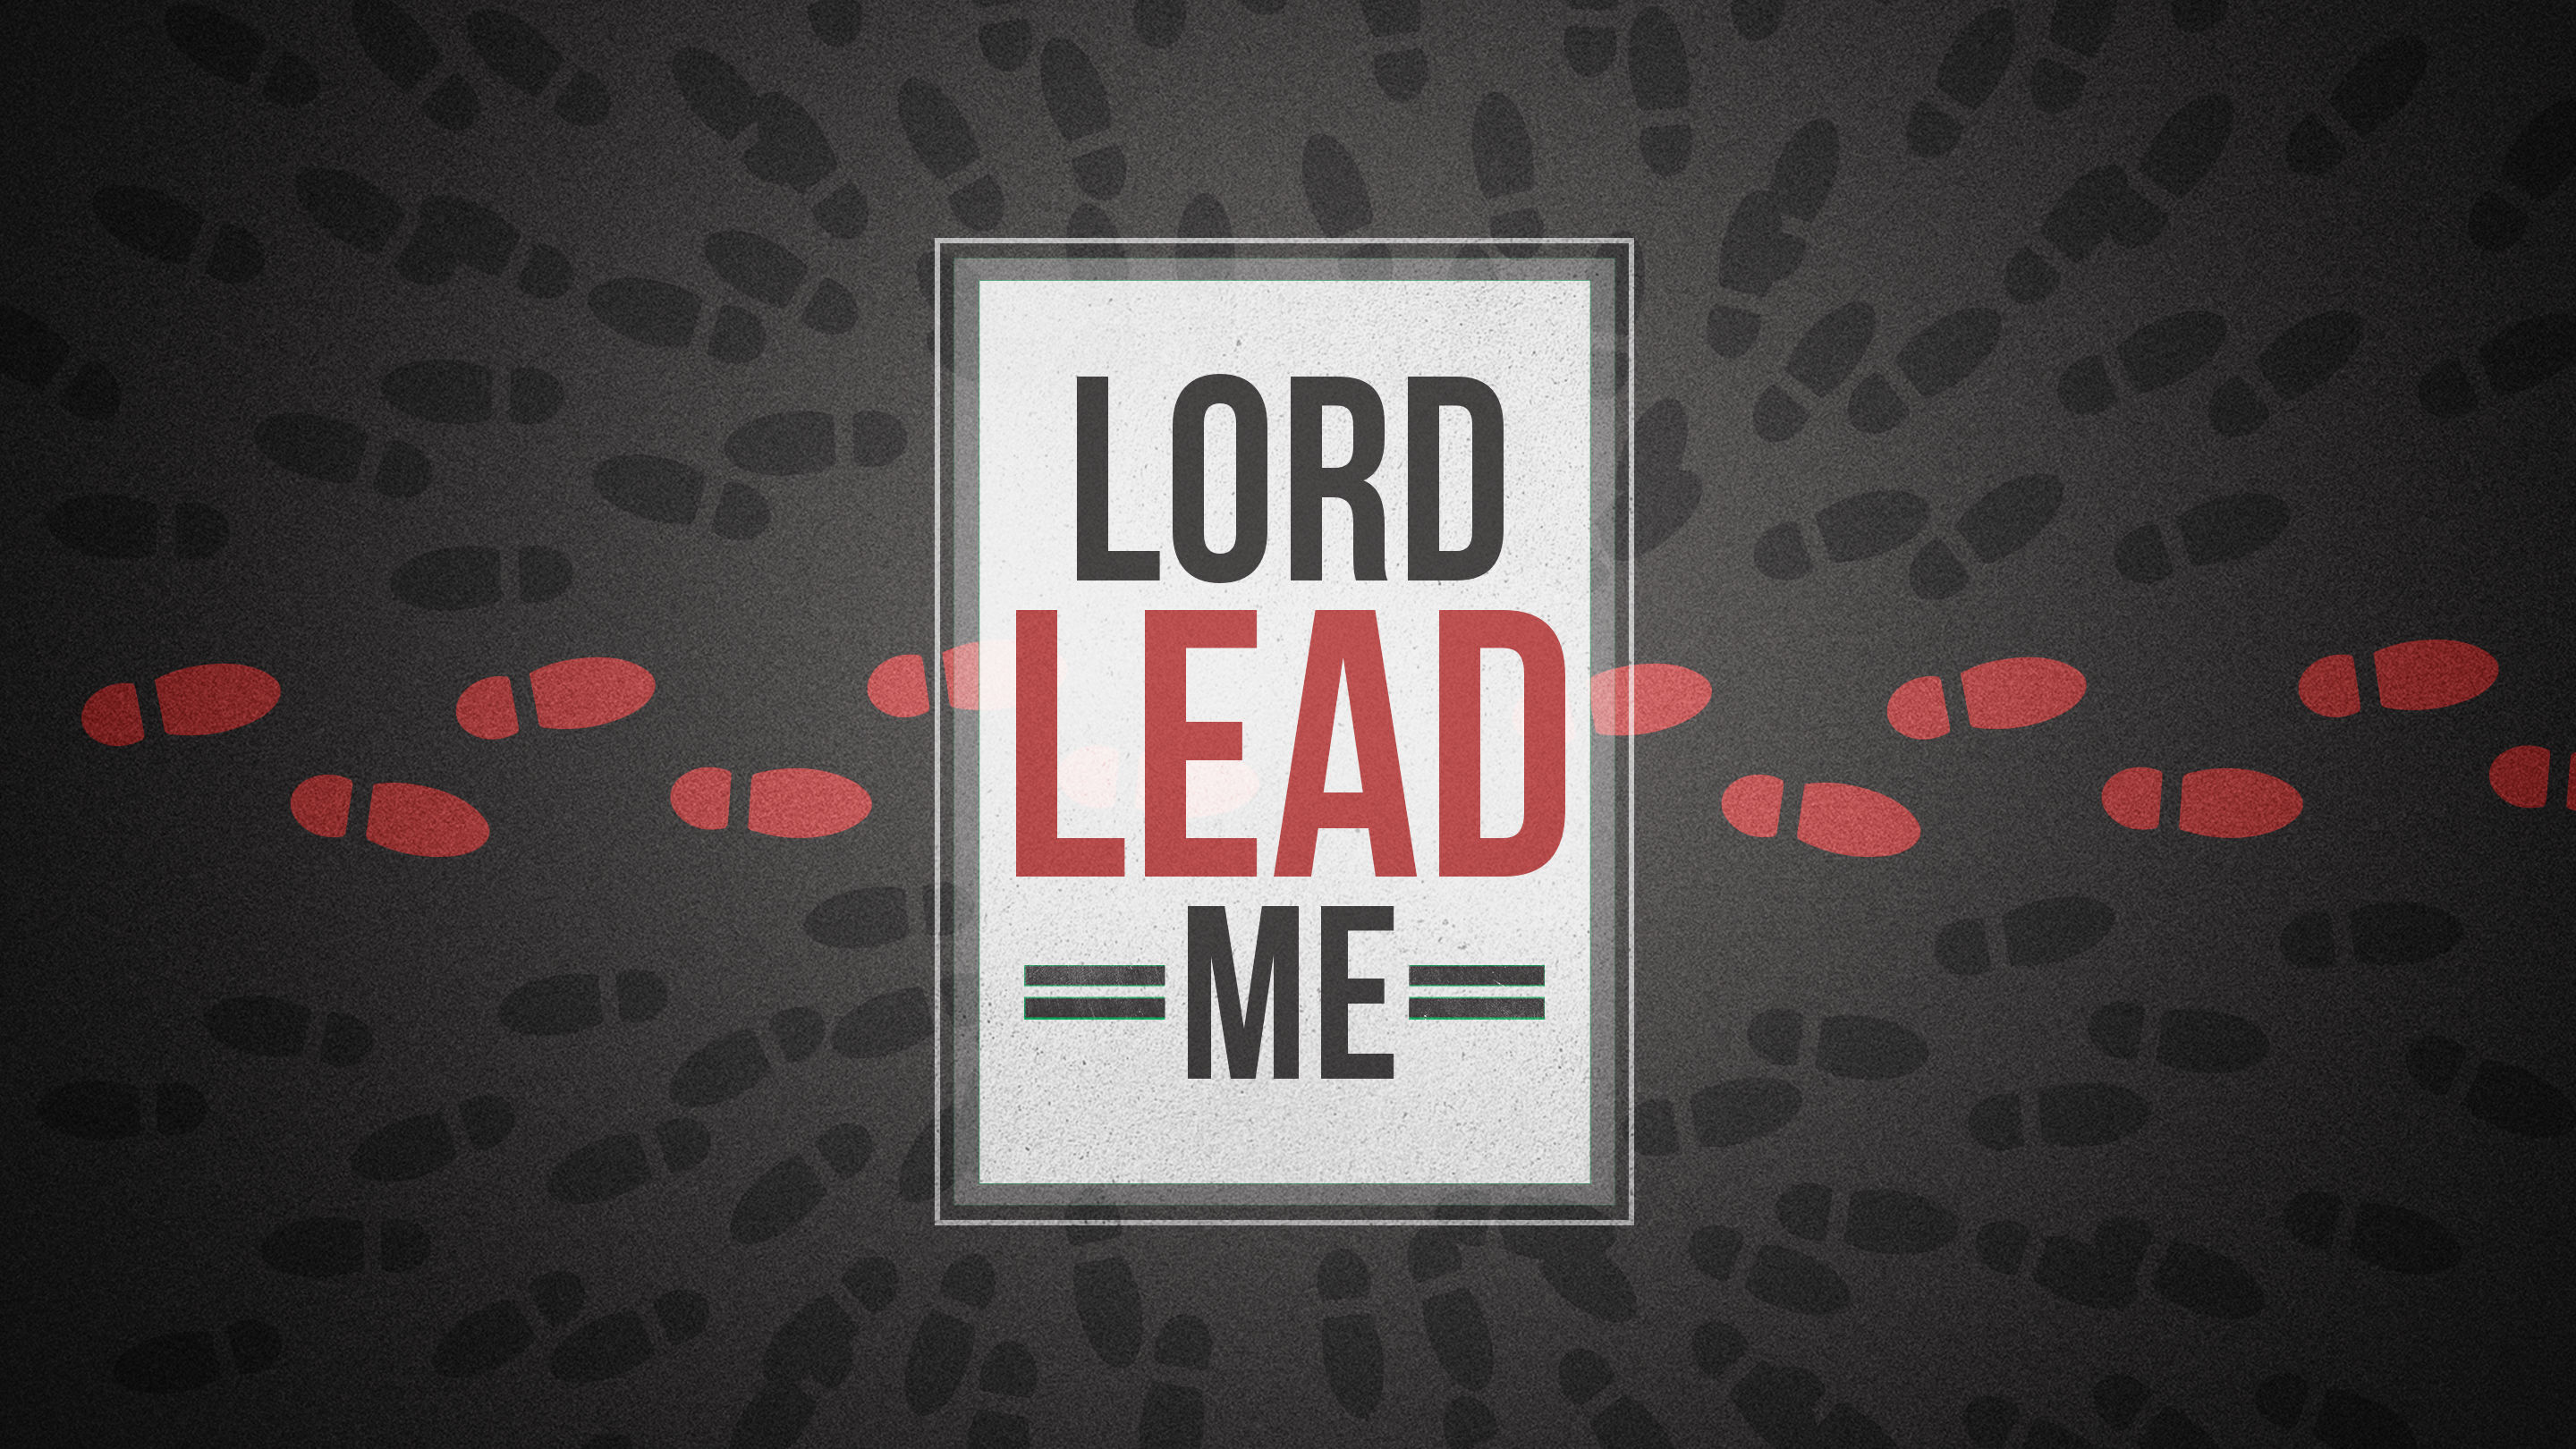 Lord, Lead Me